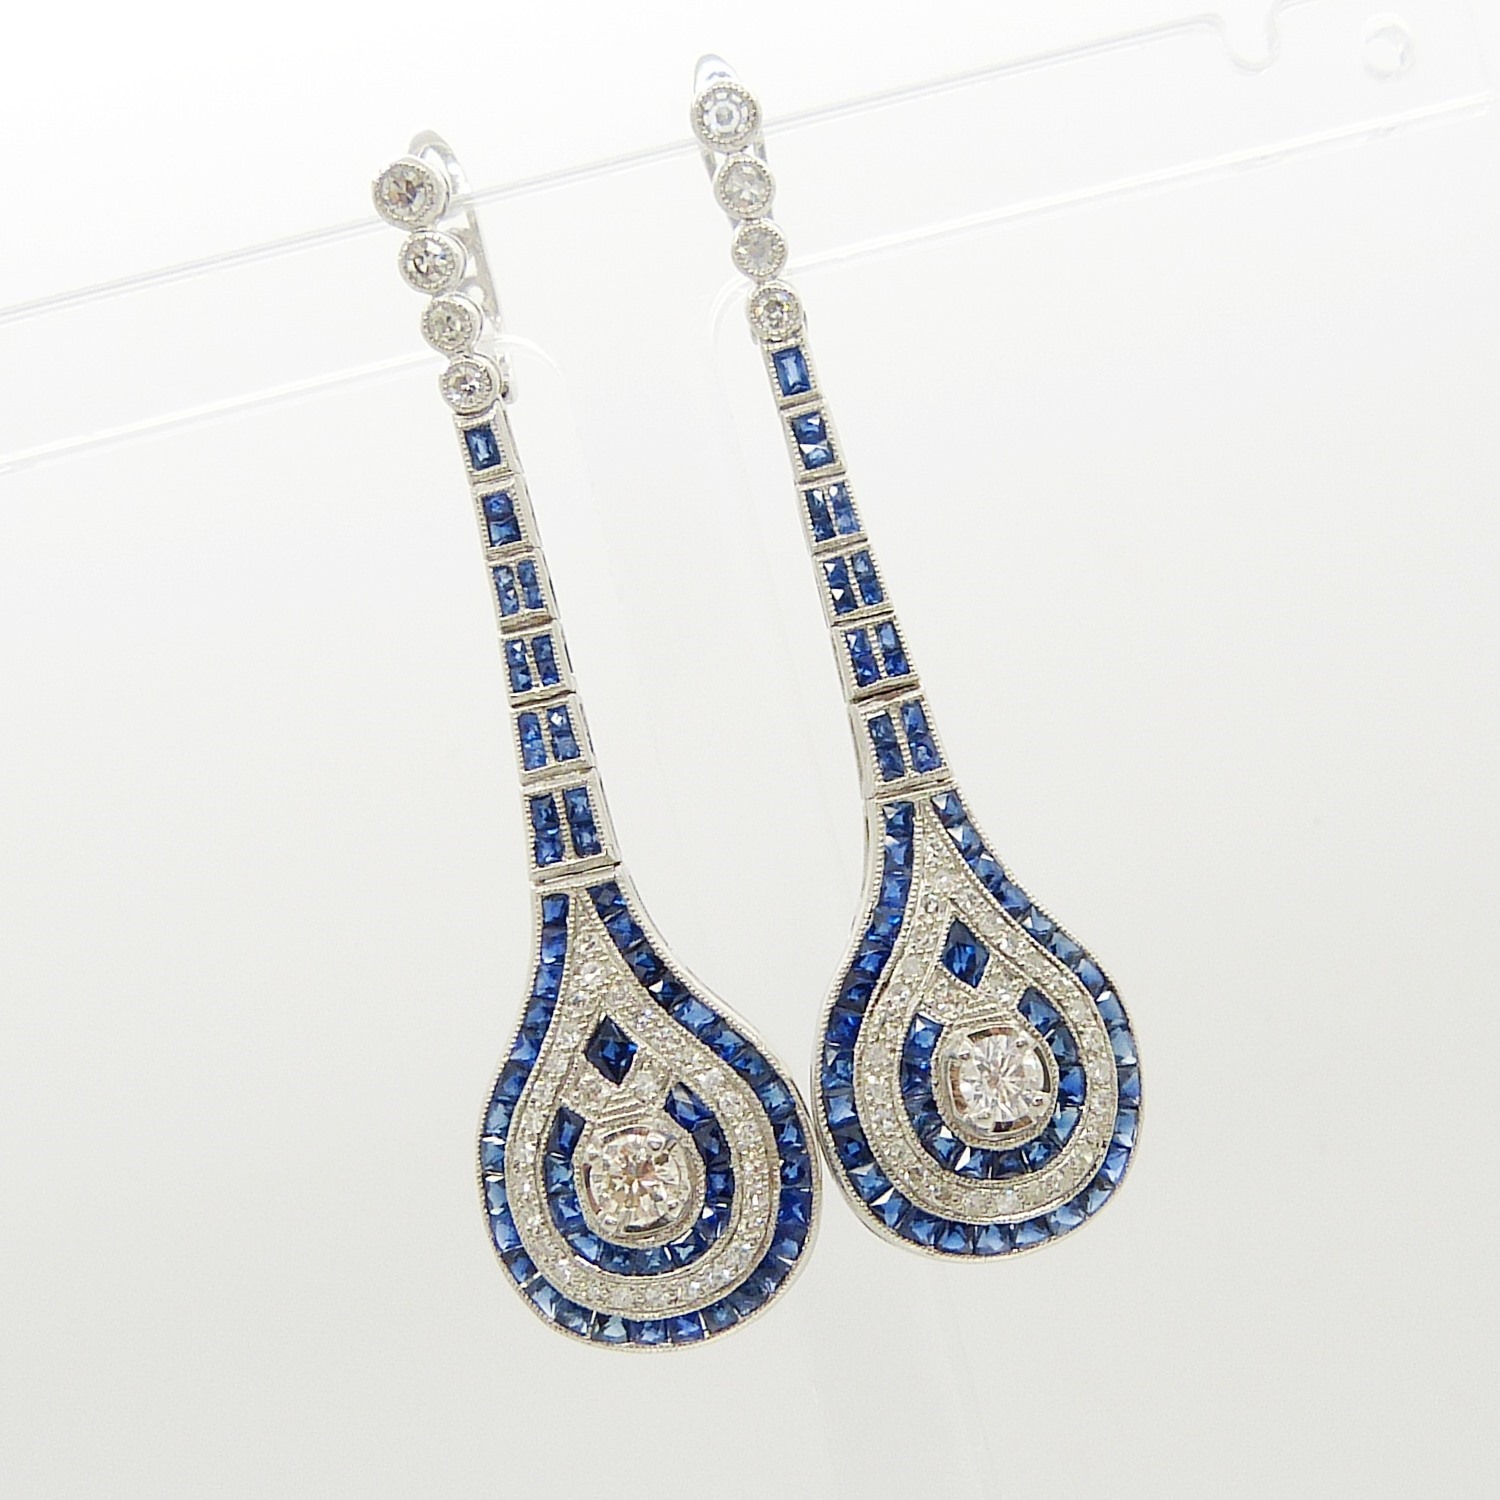 An outstanding pair of vintage-style long drop earrings set with diamonds and sapphires, boxed - Image 7 of 8